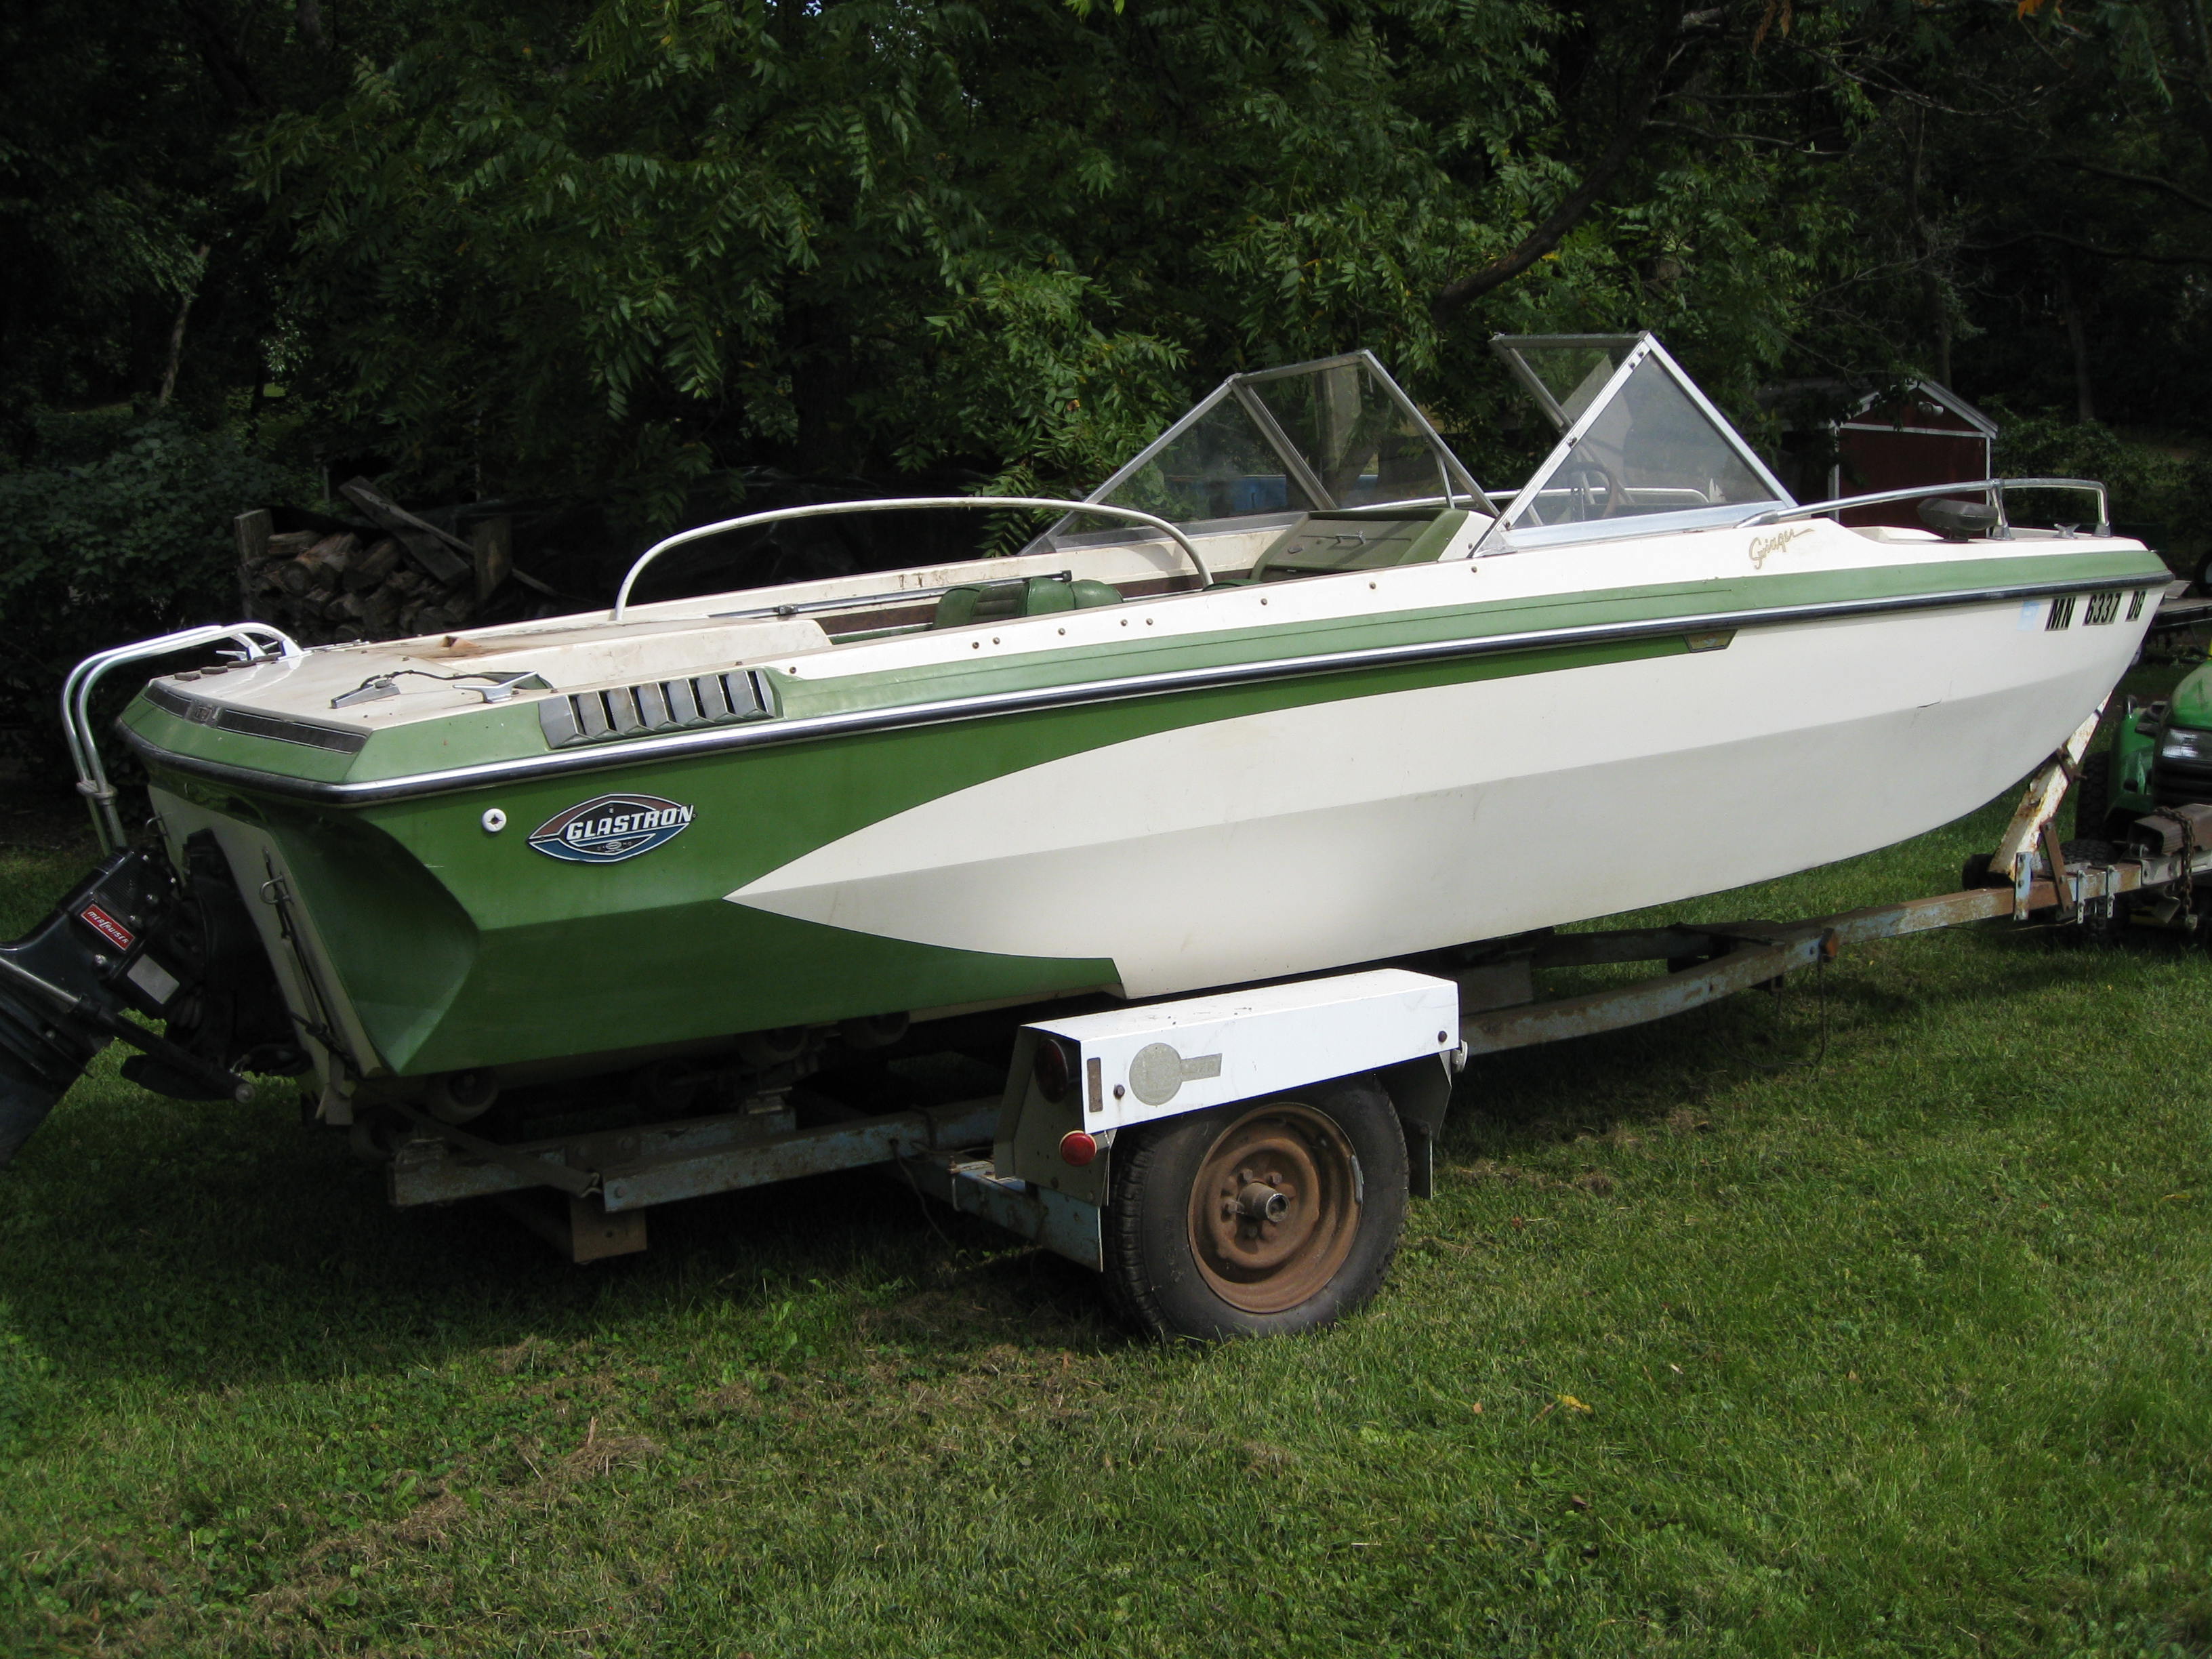 1974 Glastron V187 tri-hull for parts or repair